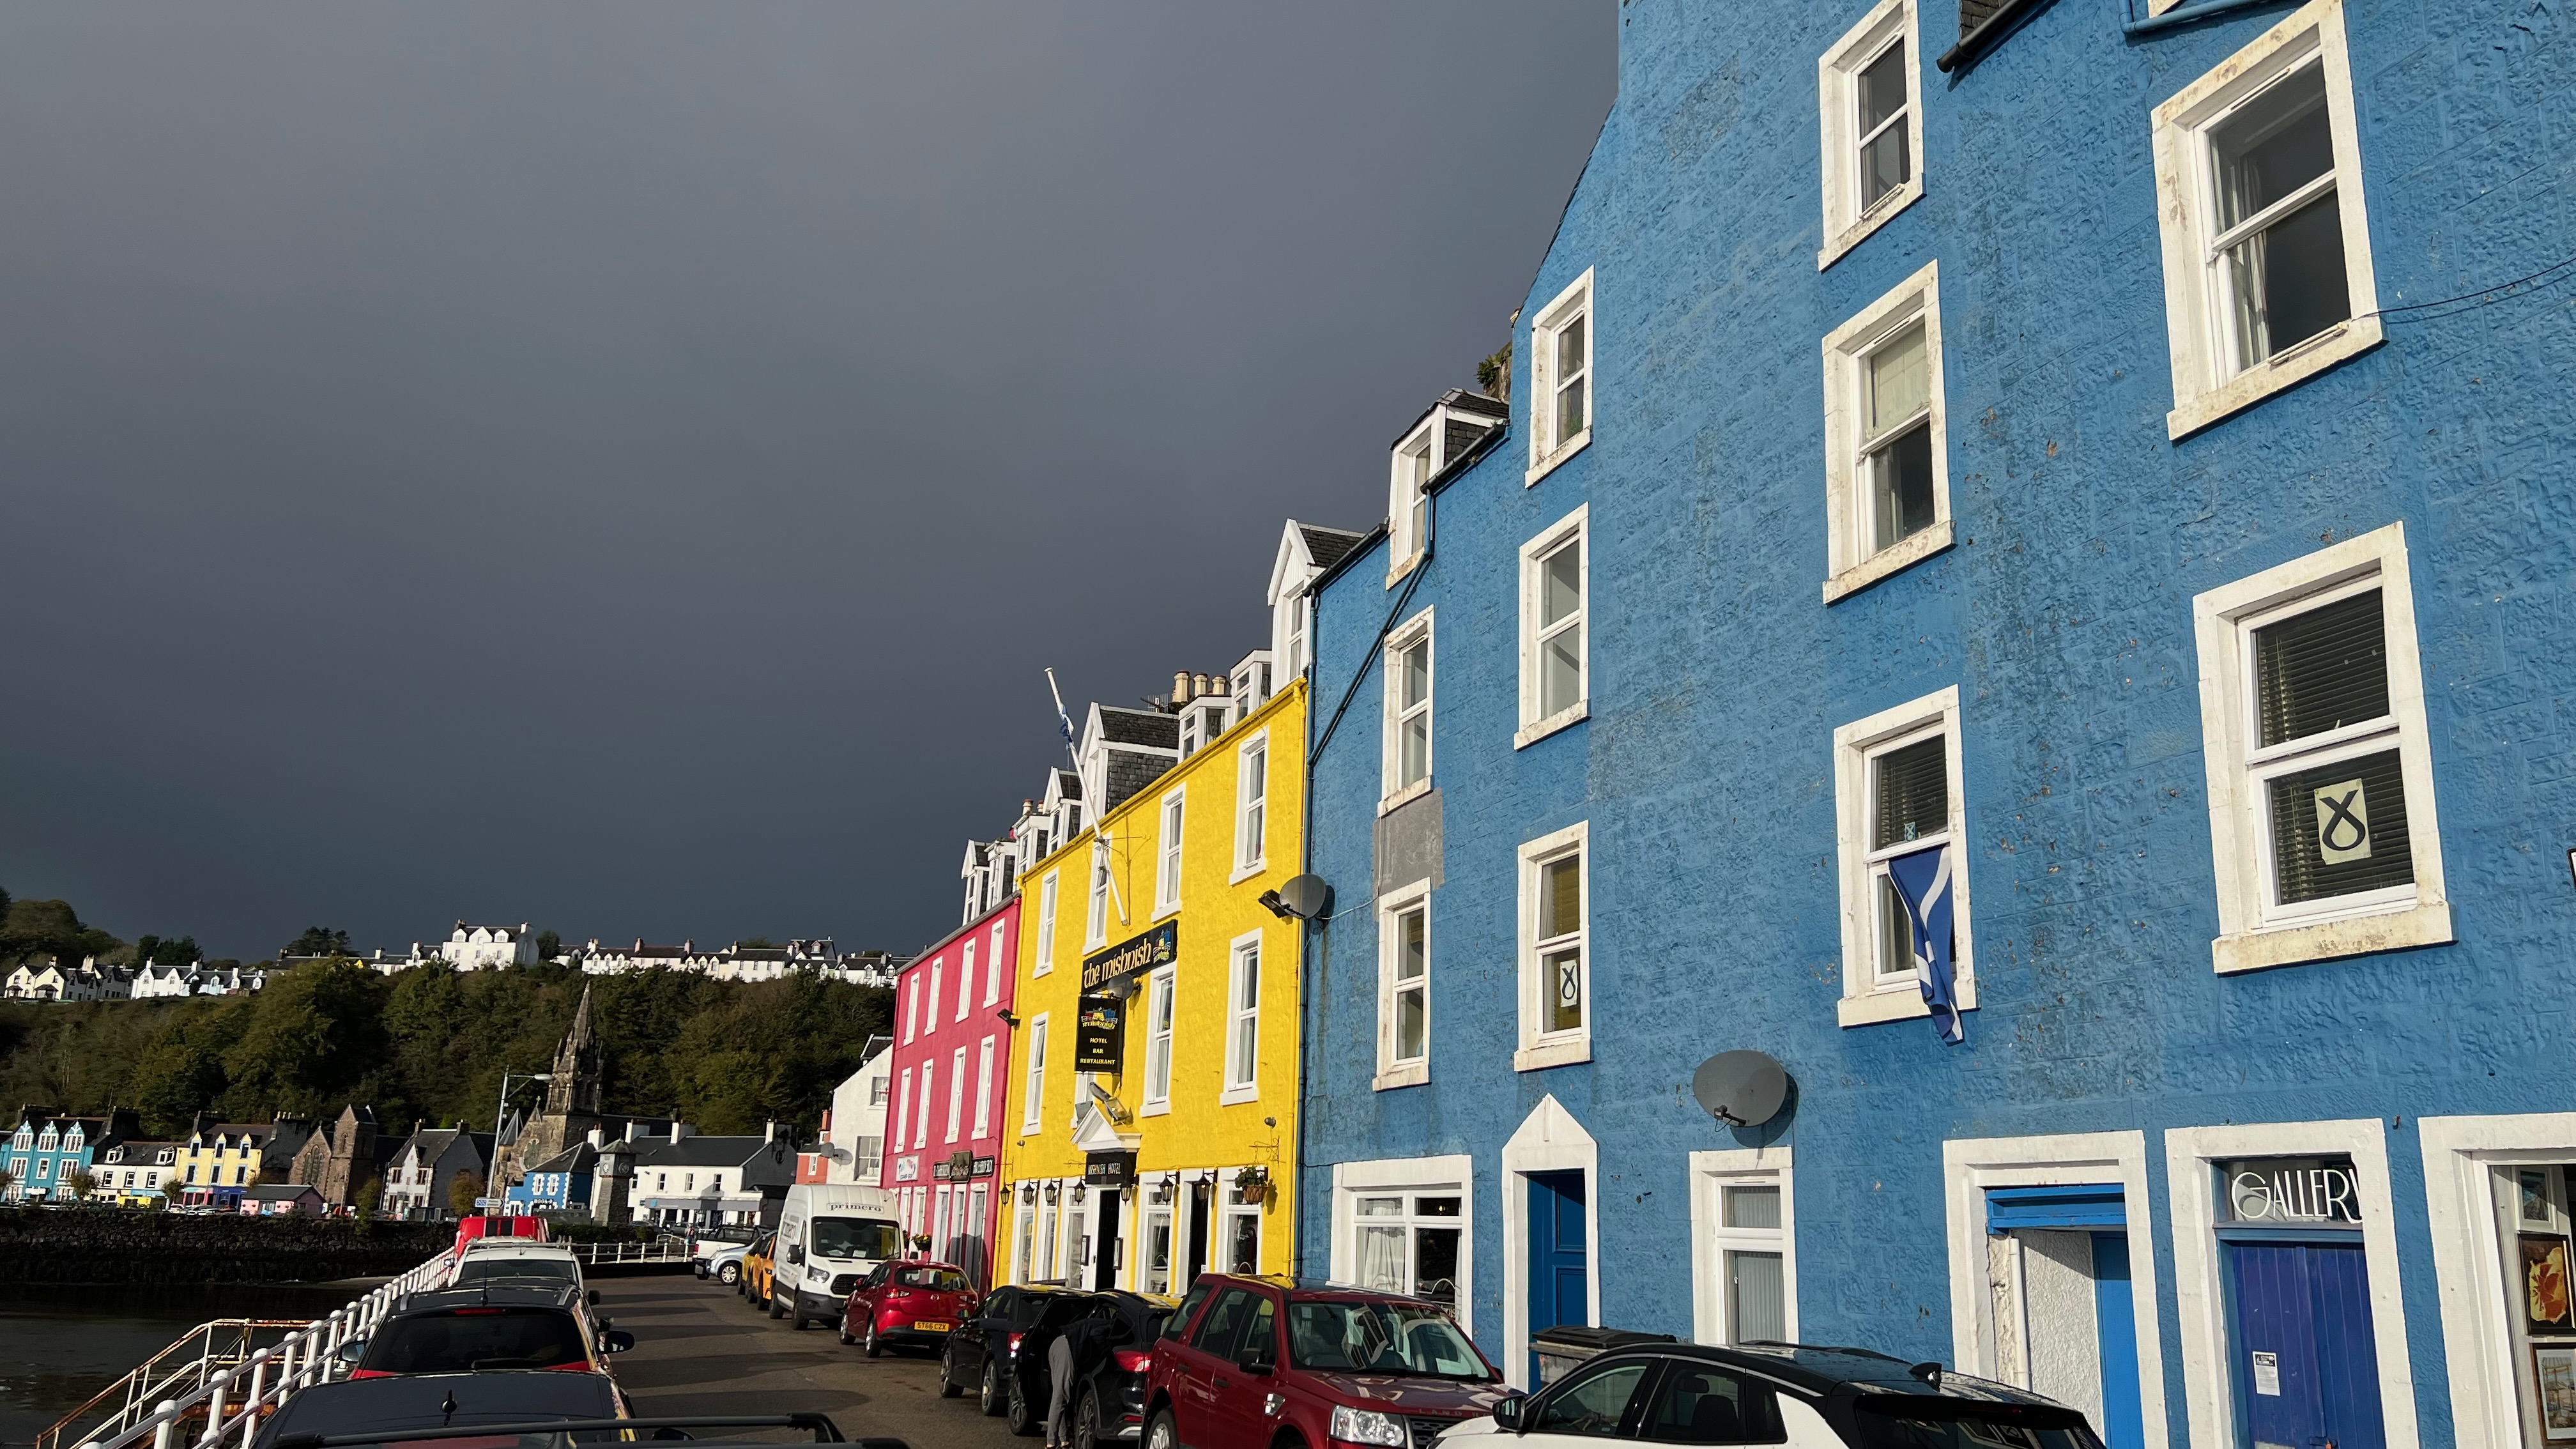 Stormy skies over Tobermory